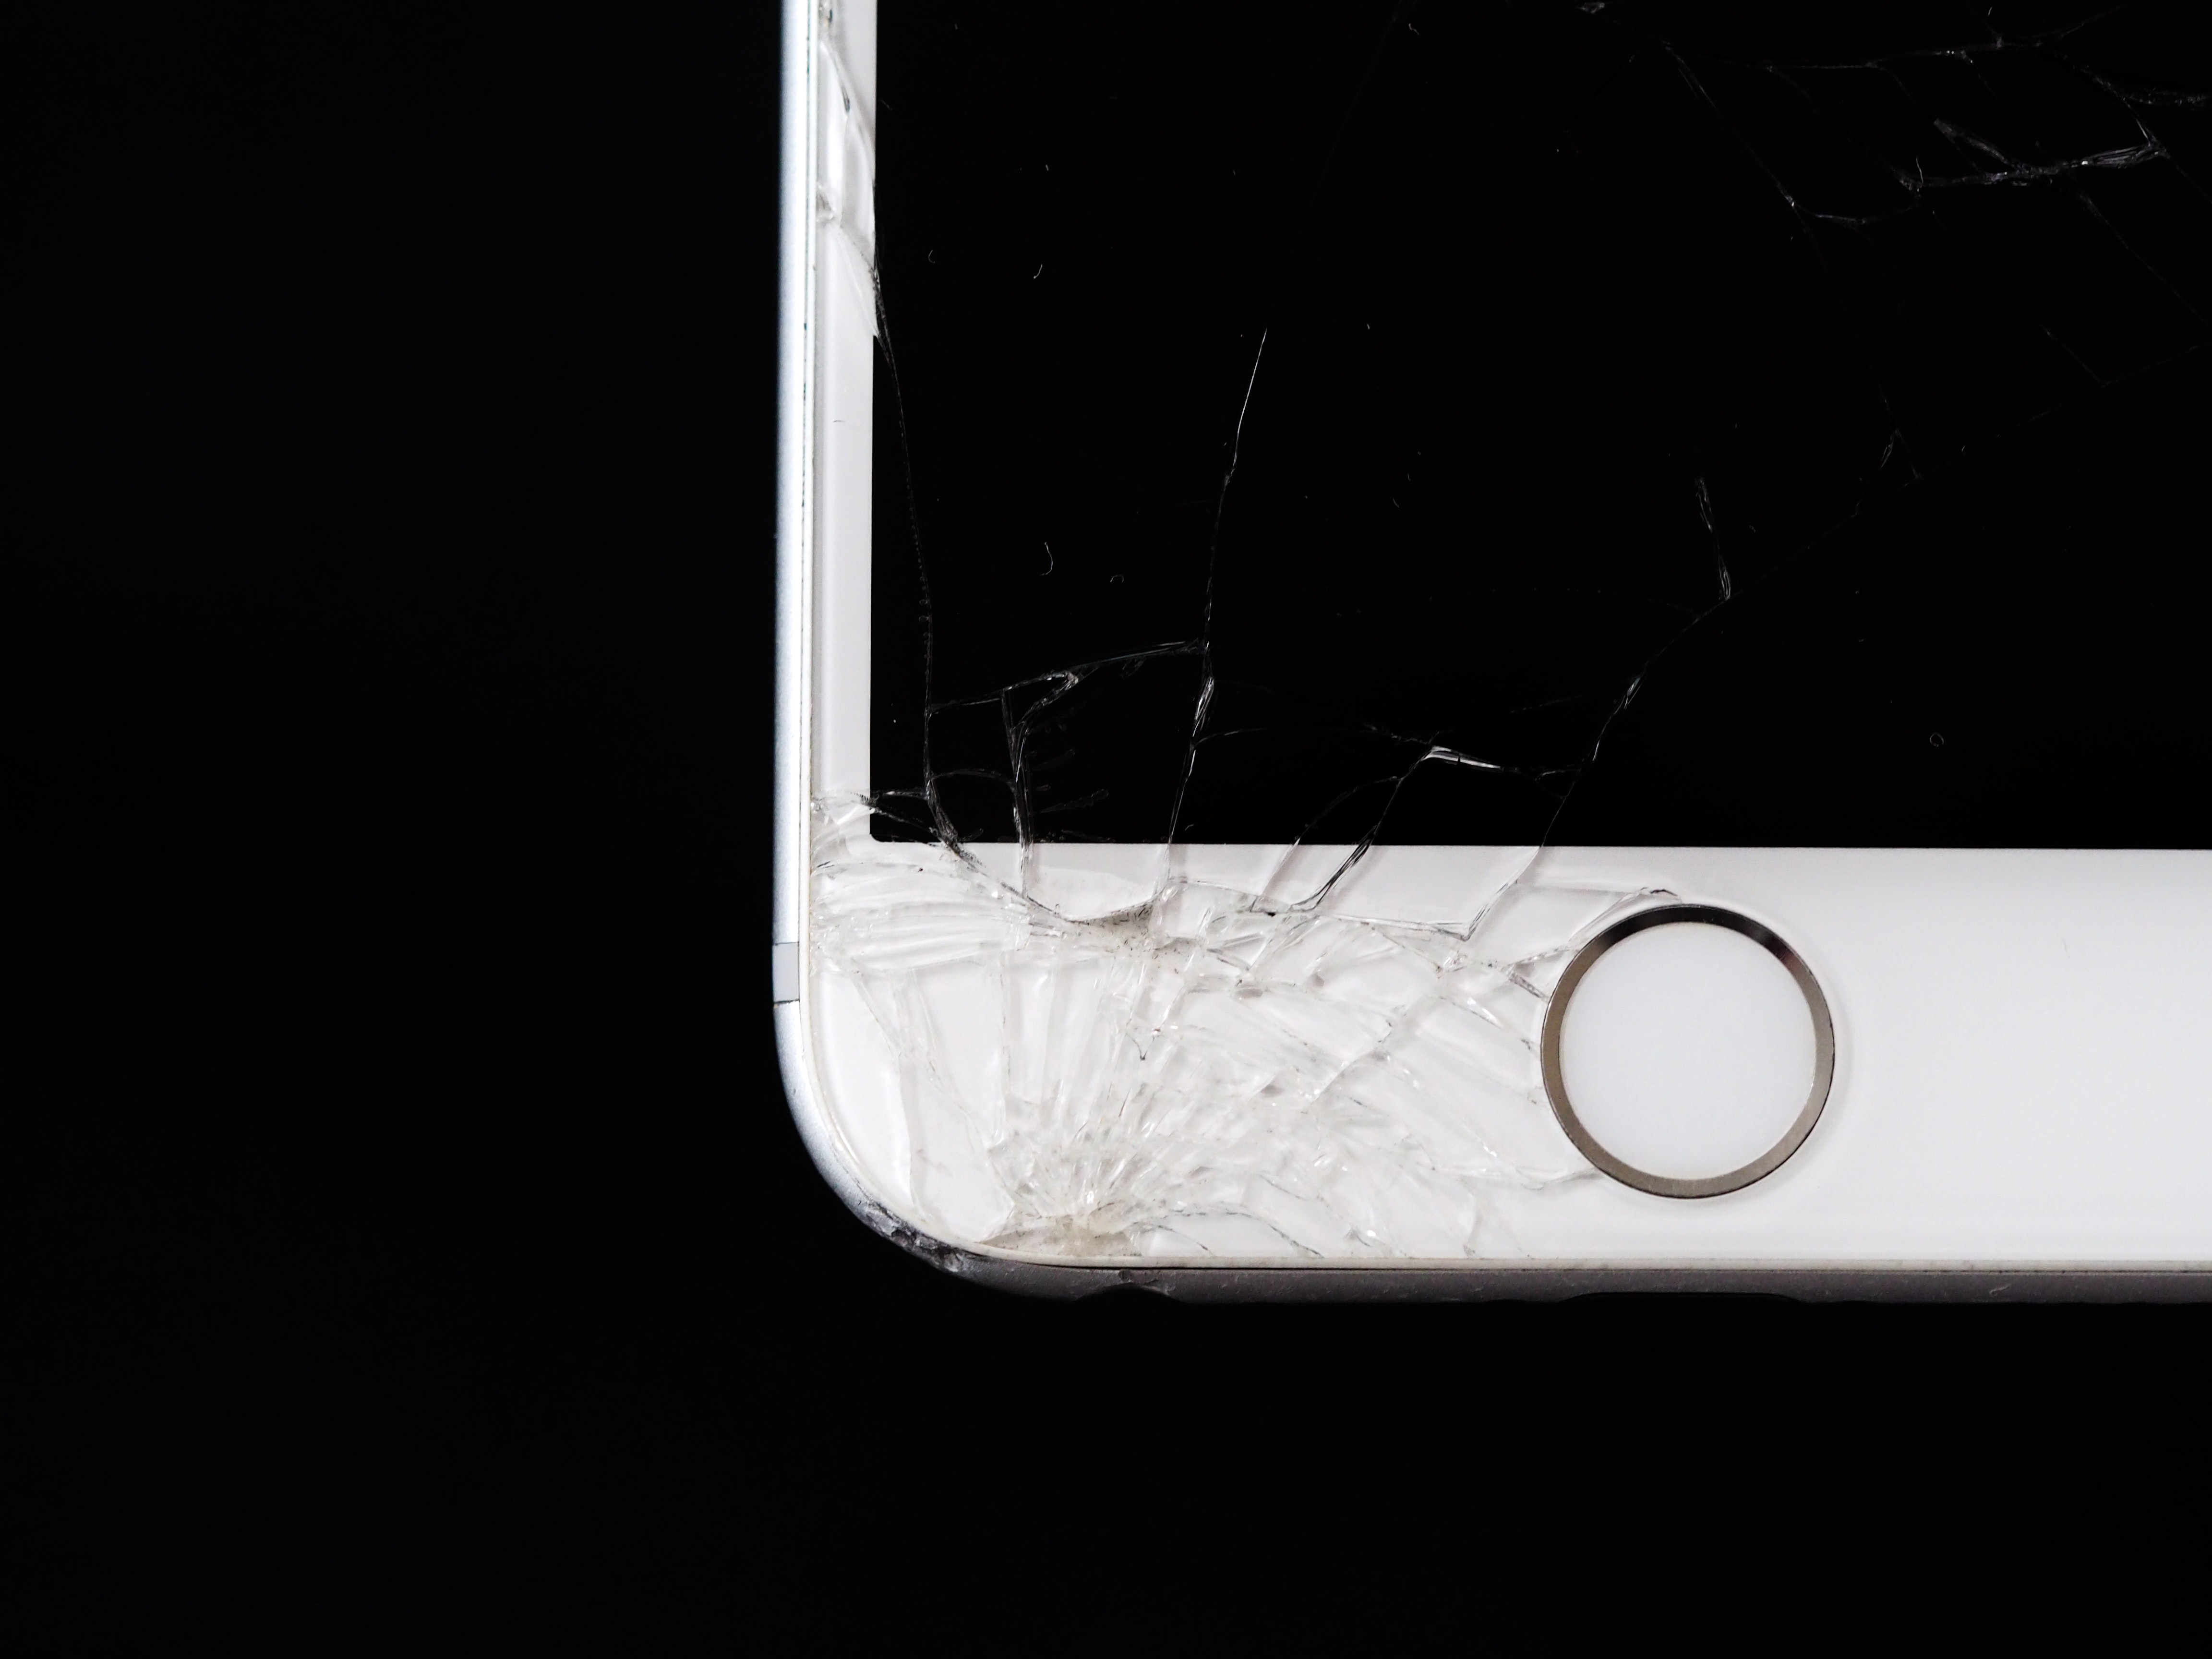 iPhone Glass Cracked: Will it Cost Me?